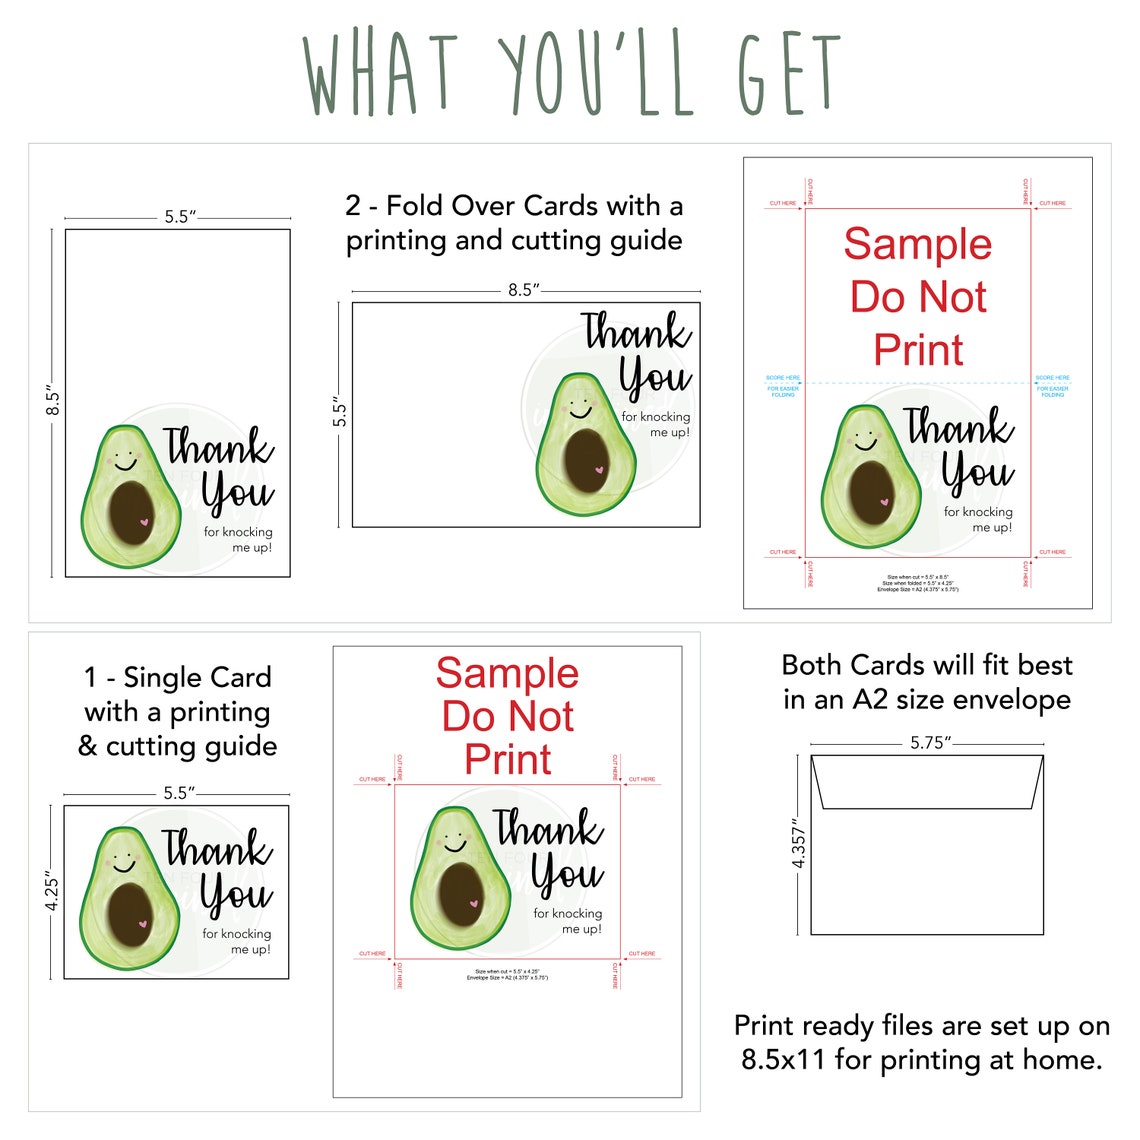 avocado-thank-you-for-knocking-me-up-card-ivf-card-humor-etsy